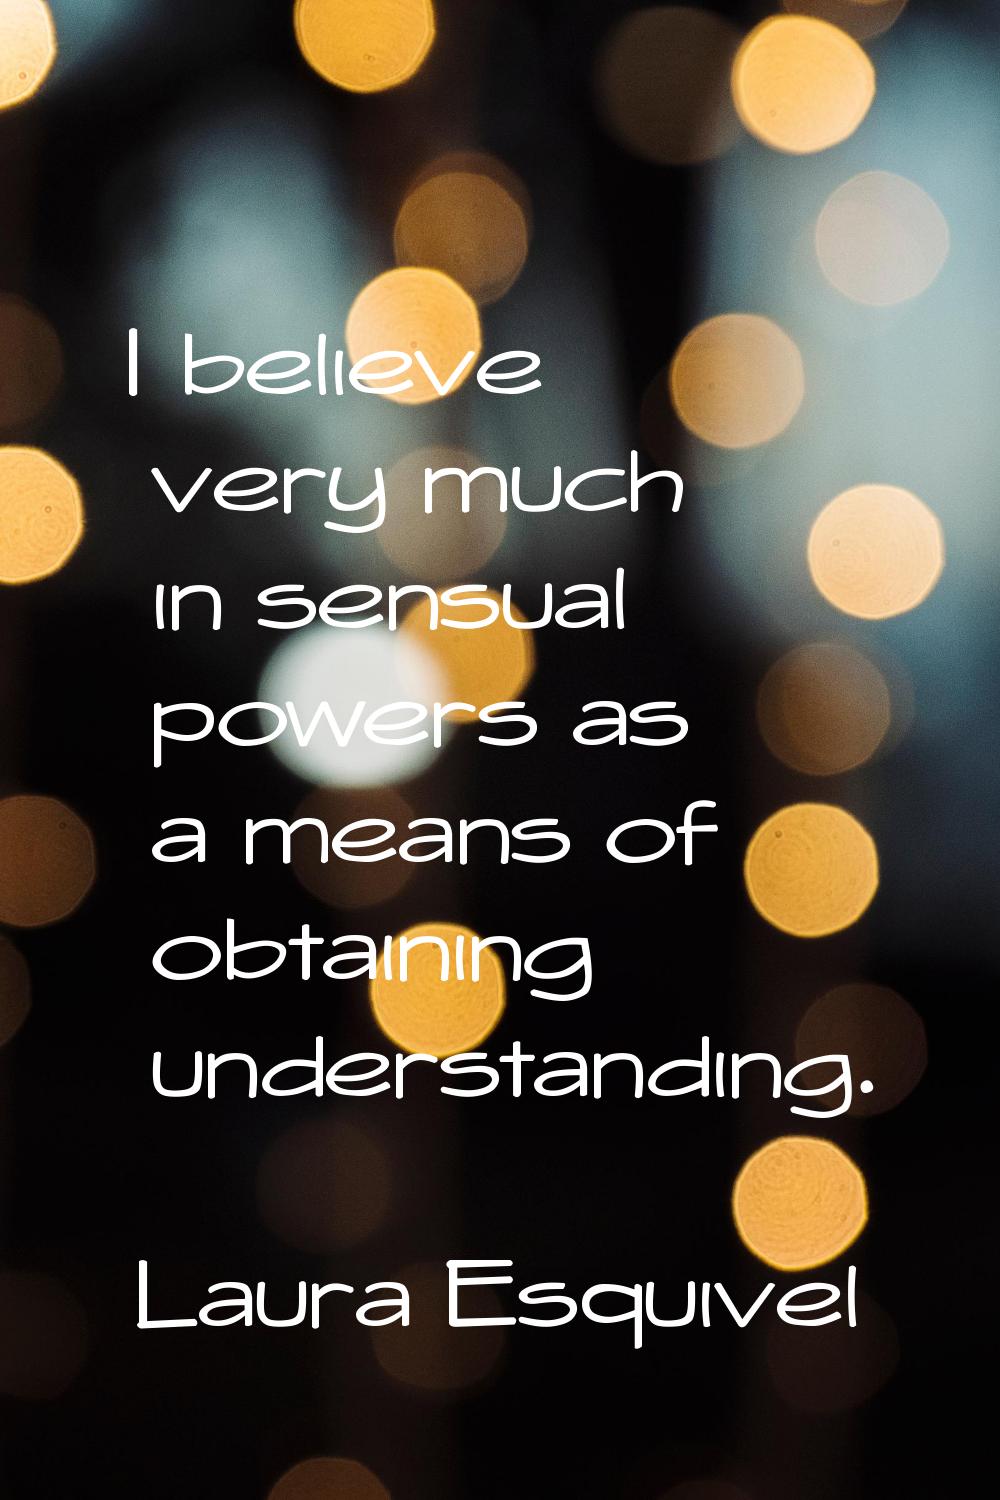 I believe very much in sensual powers as a means of obtaining understanding.